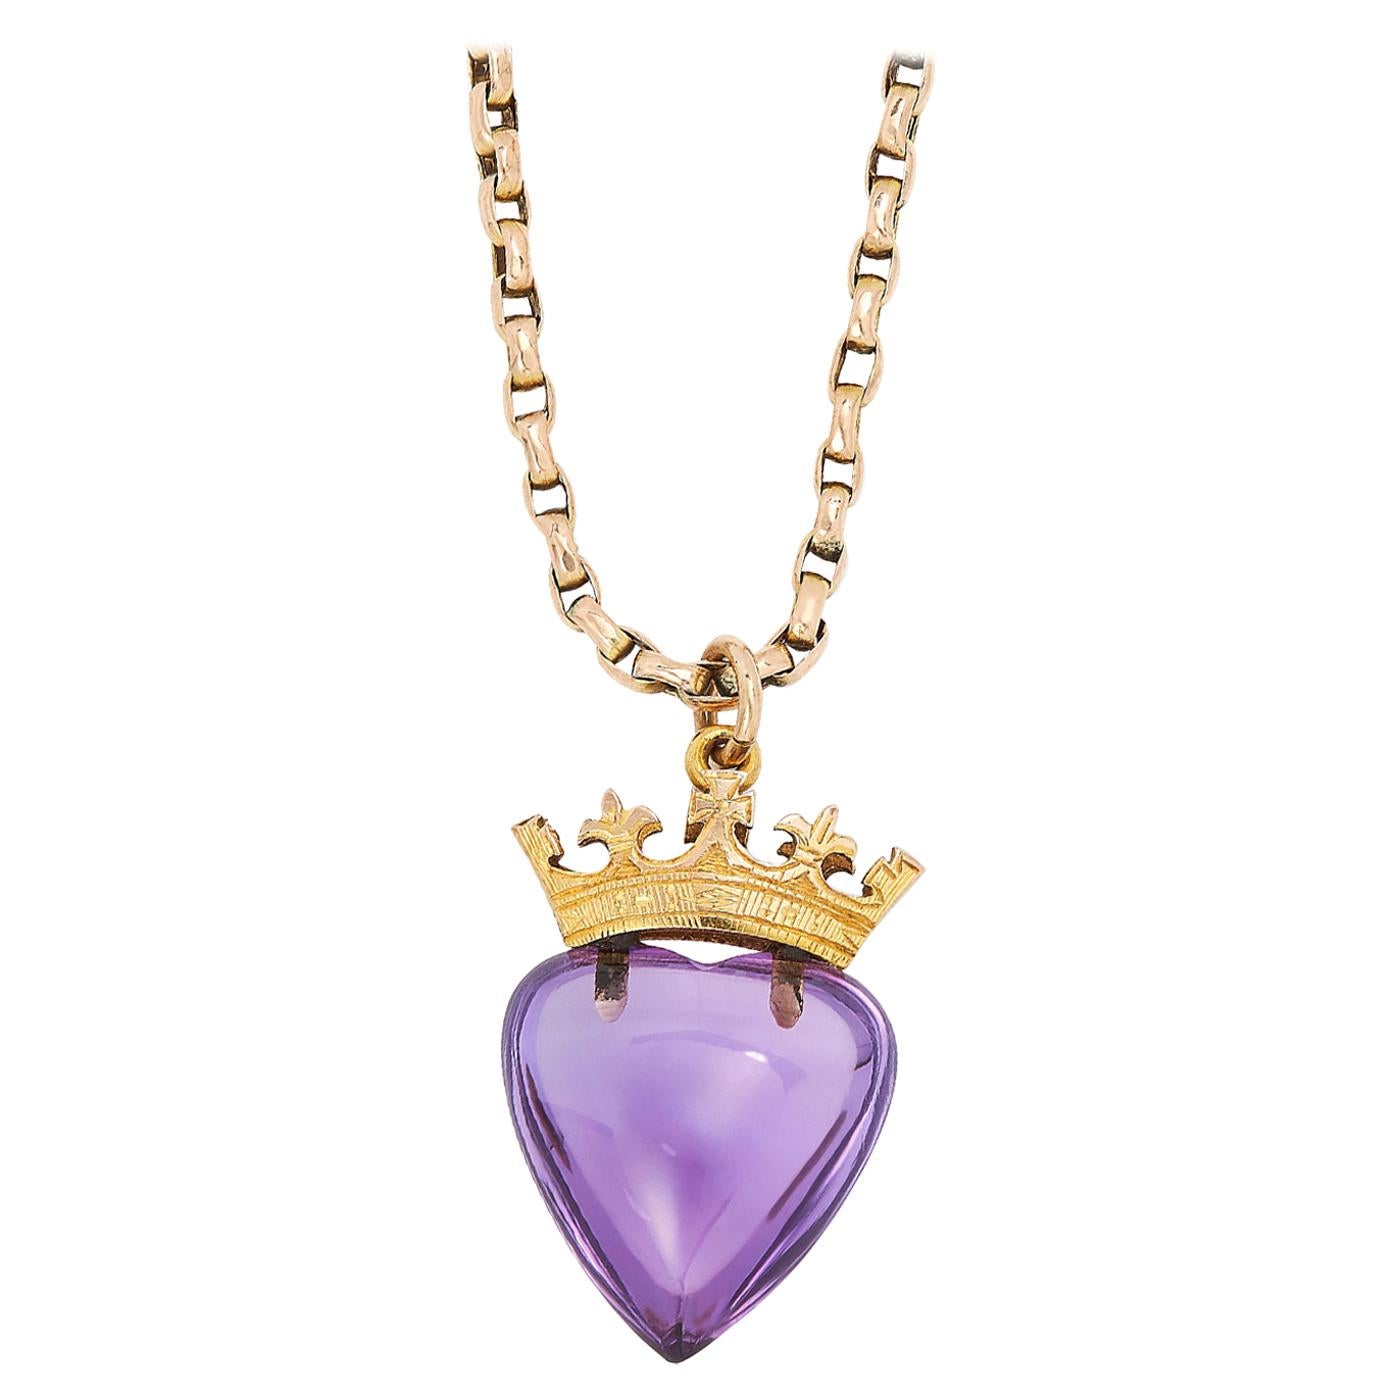 Amethyst Sweetheart Pendant and Chain, Early 1900s